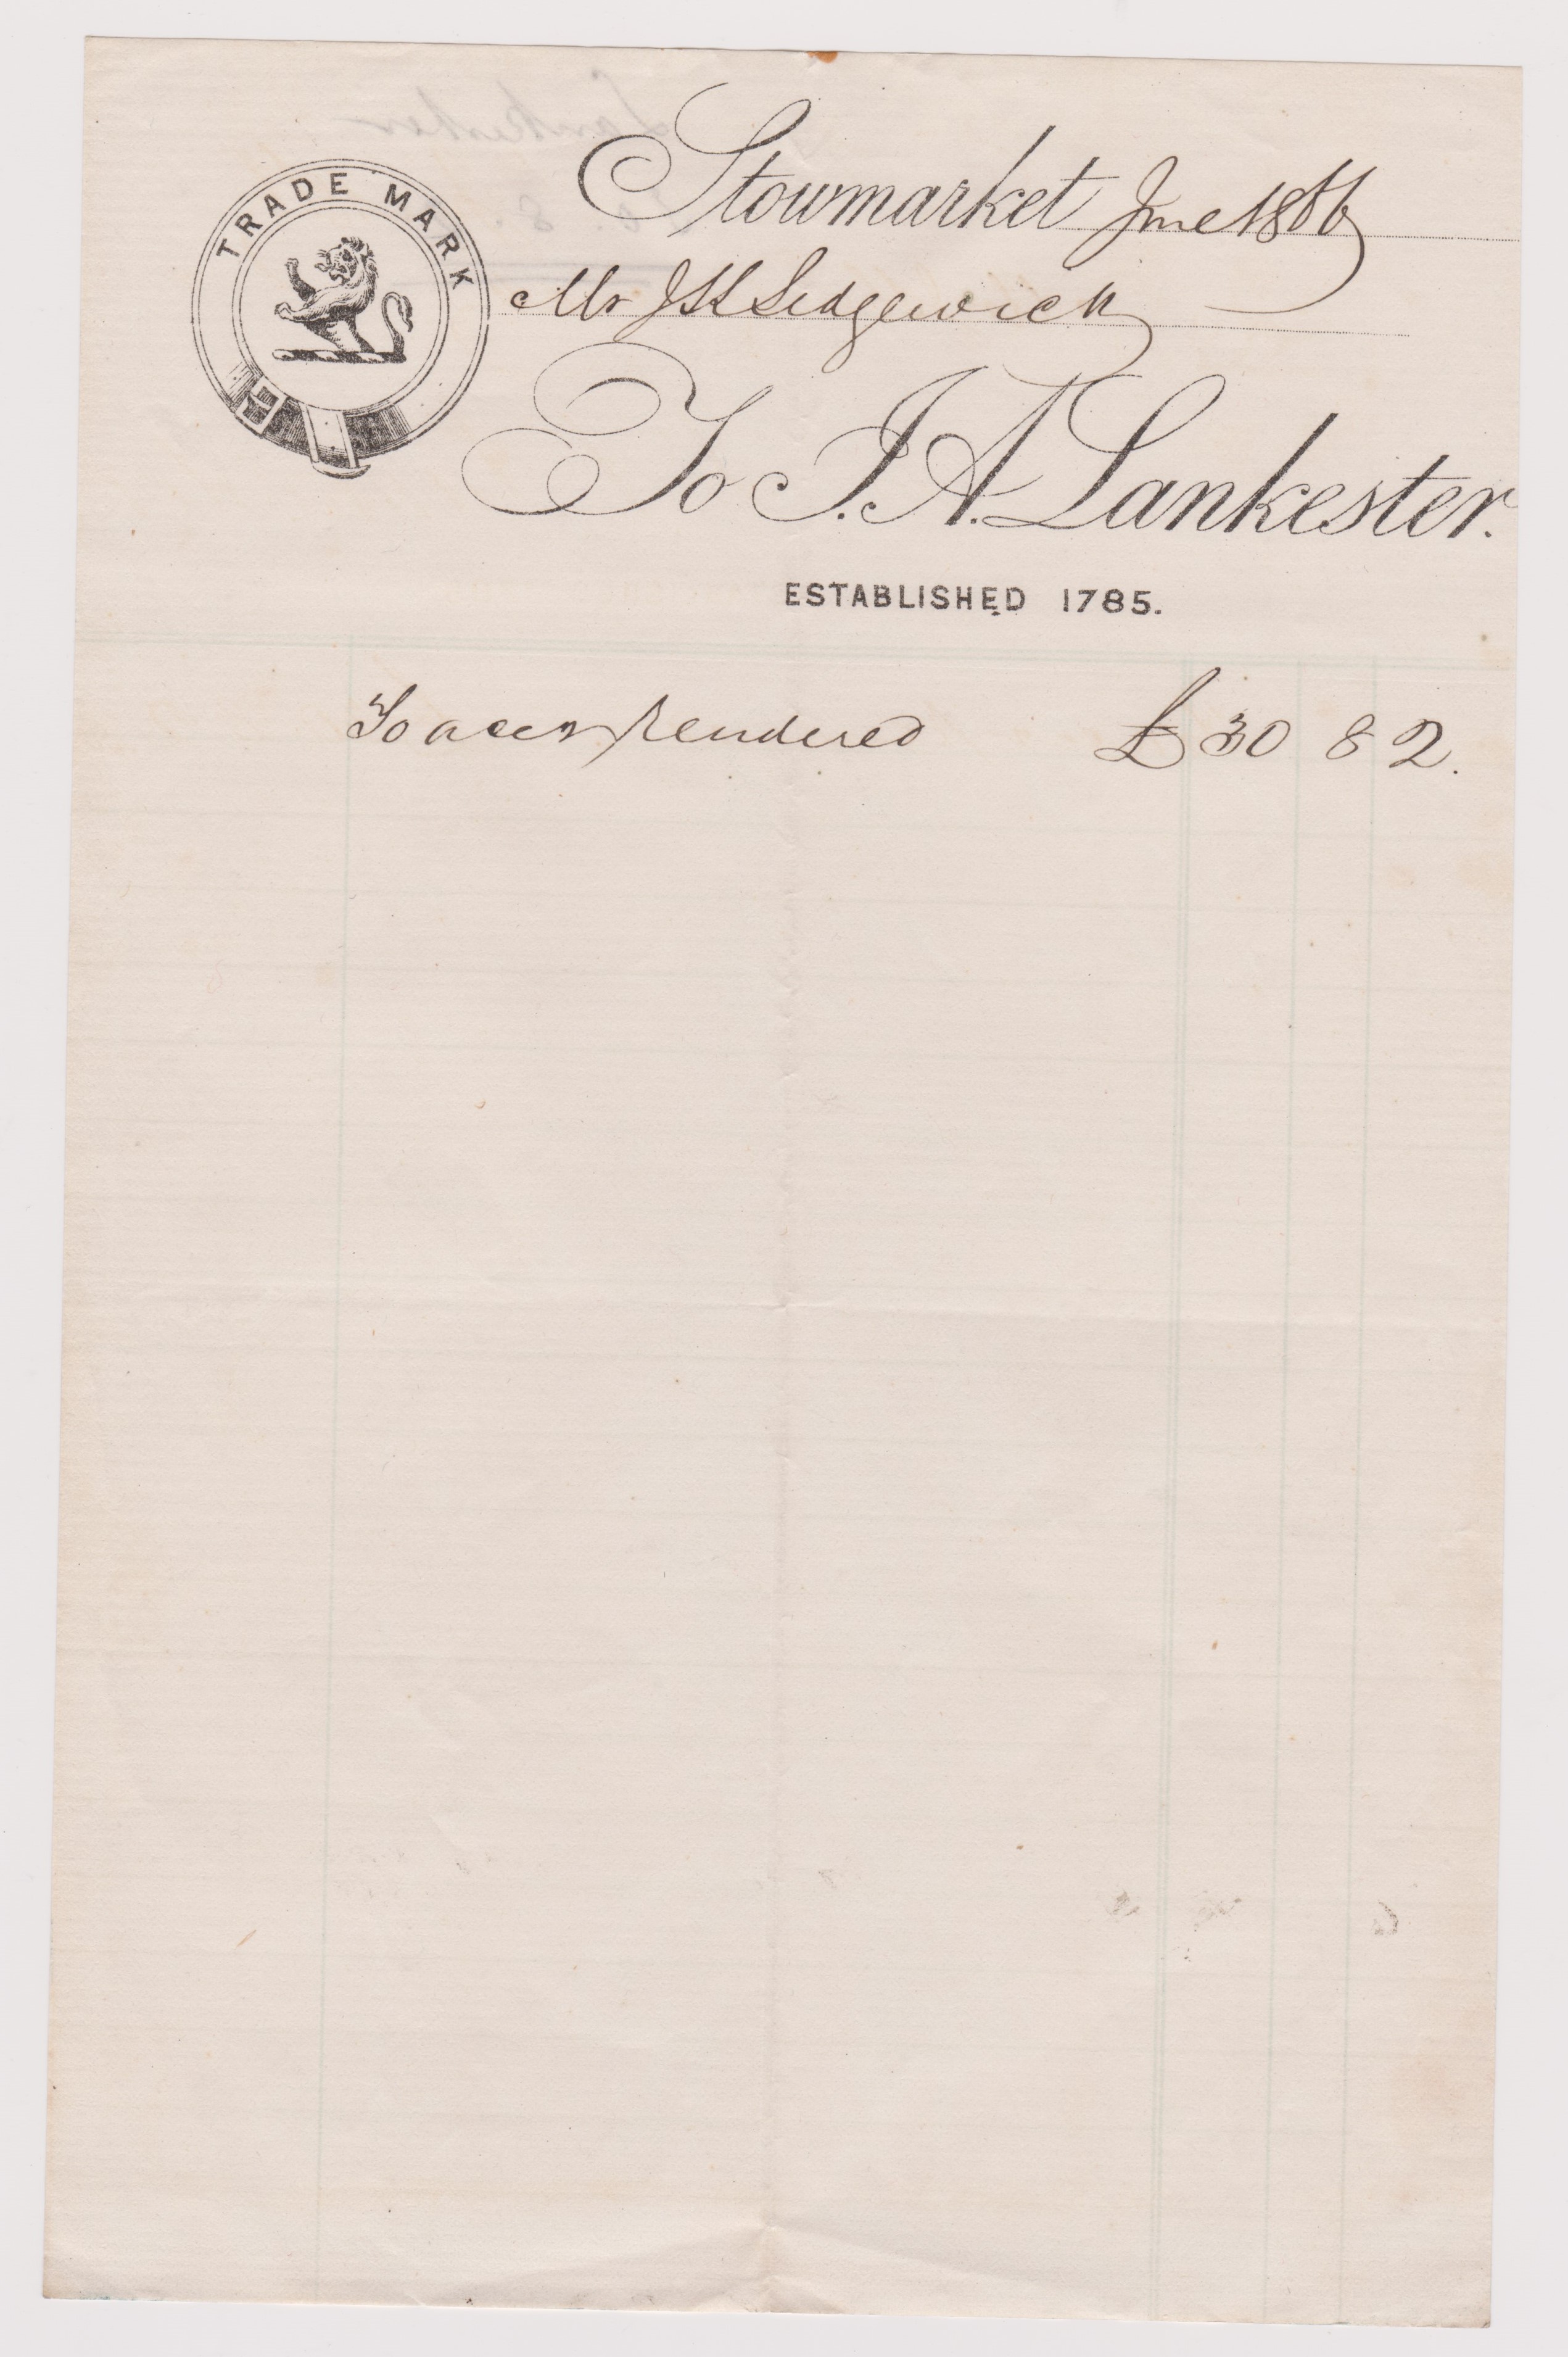 Stowmarket June 1866 Mr Sedgewick to L A Lankester established 1785 possibly the wholesale and